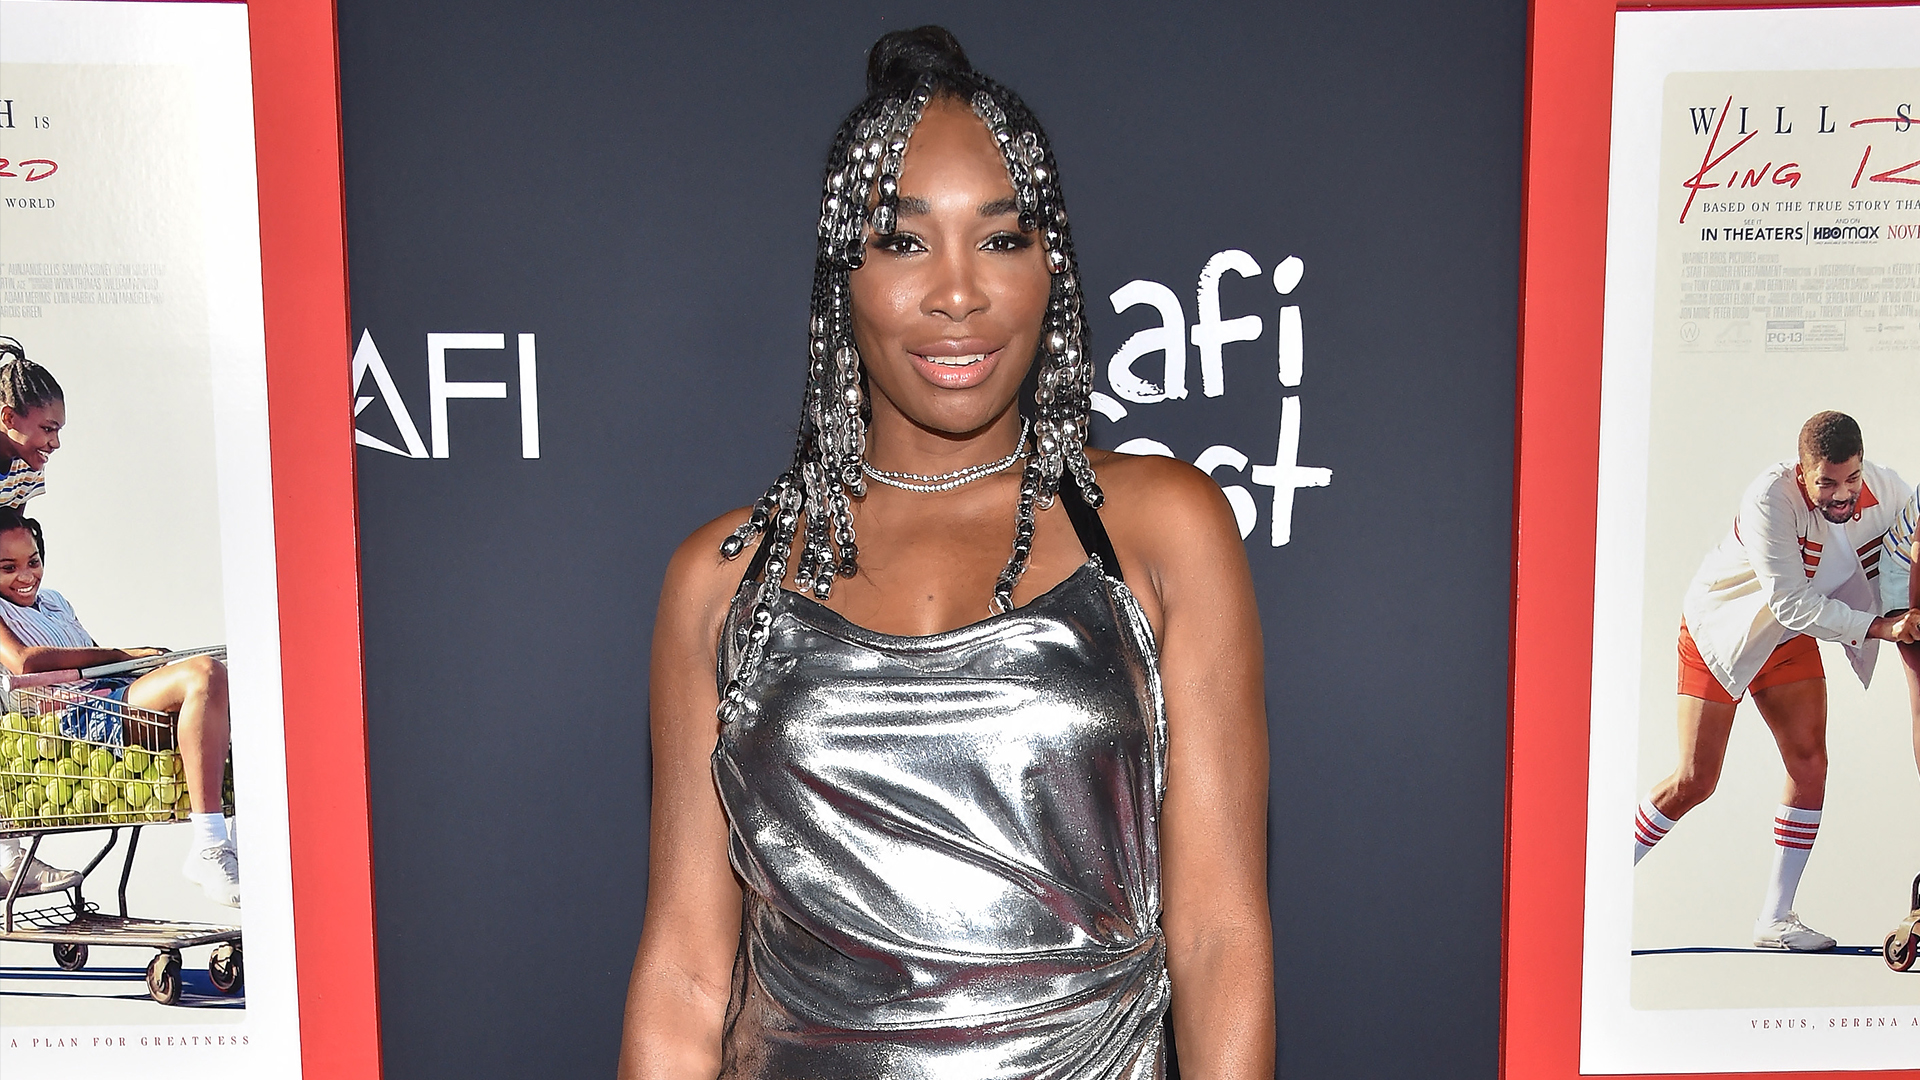 Tennis Star Venus Williams To Give Away $2M In Free Online Therapy Through Joint Initiative